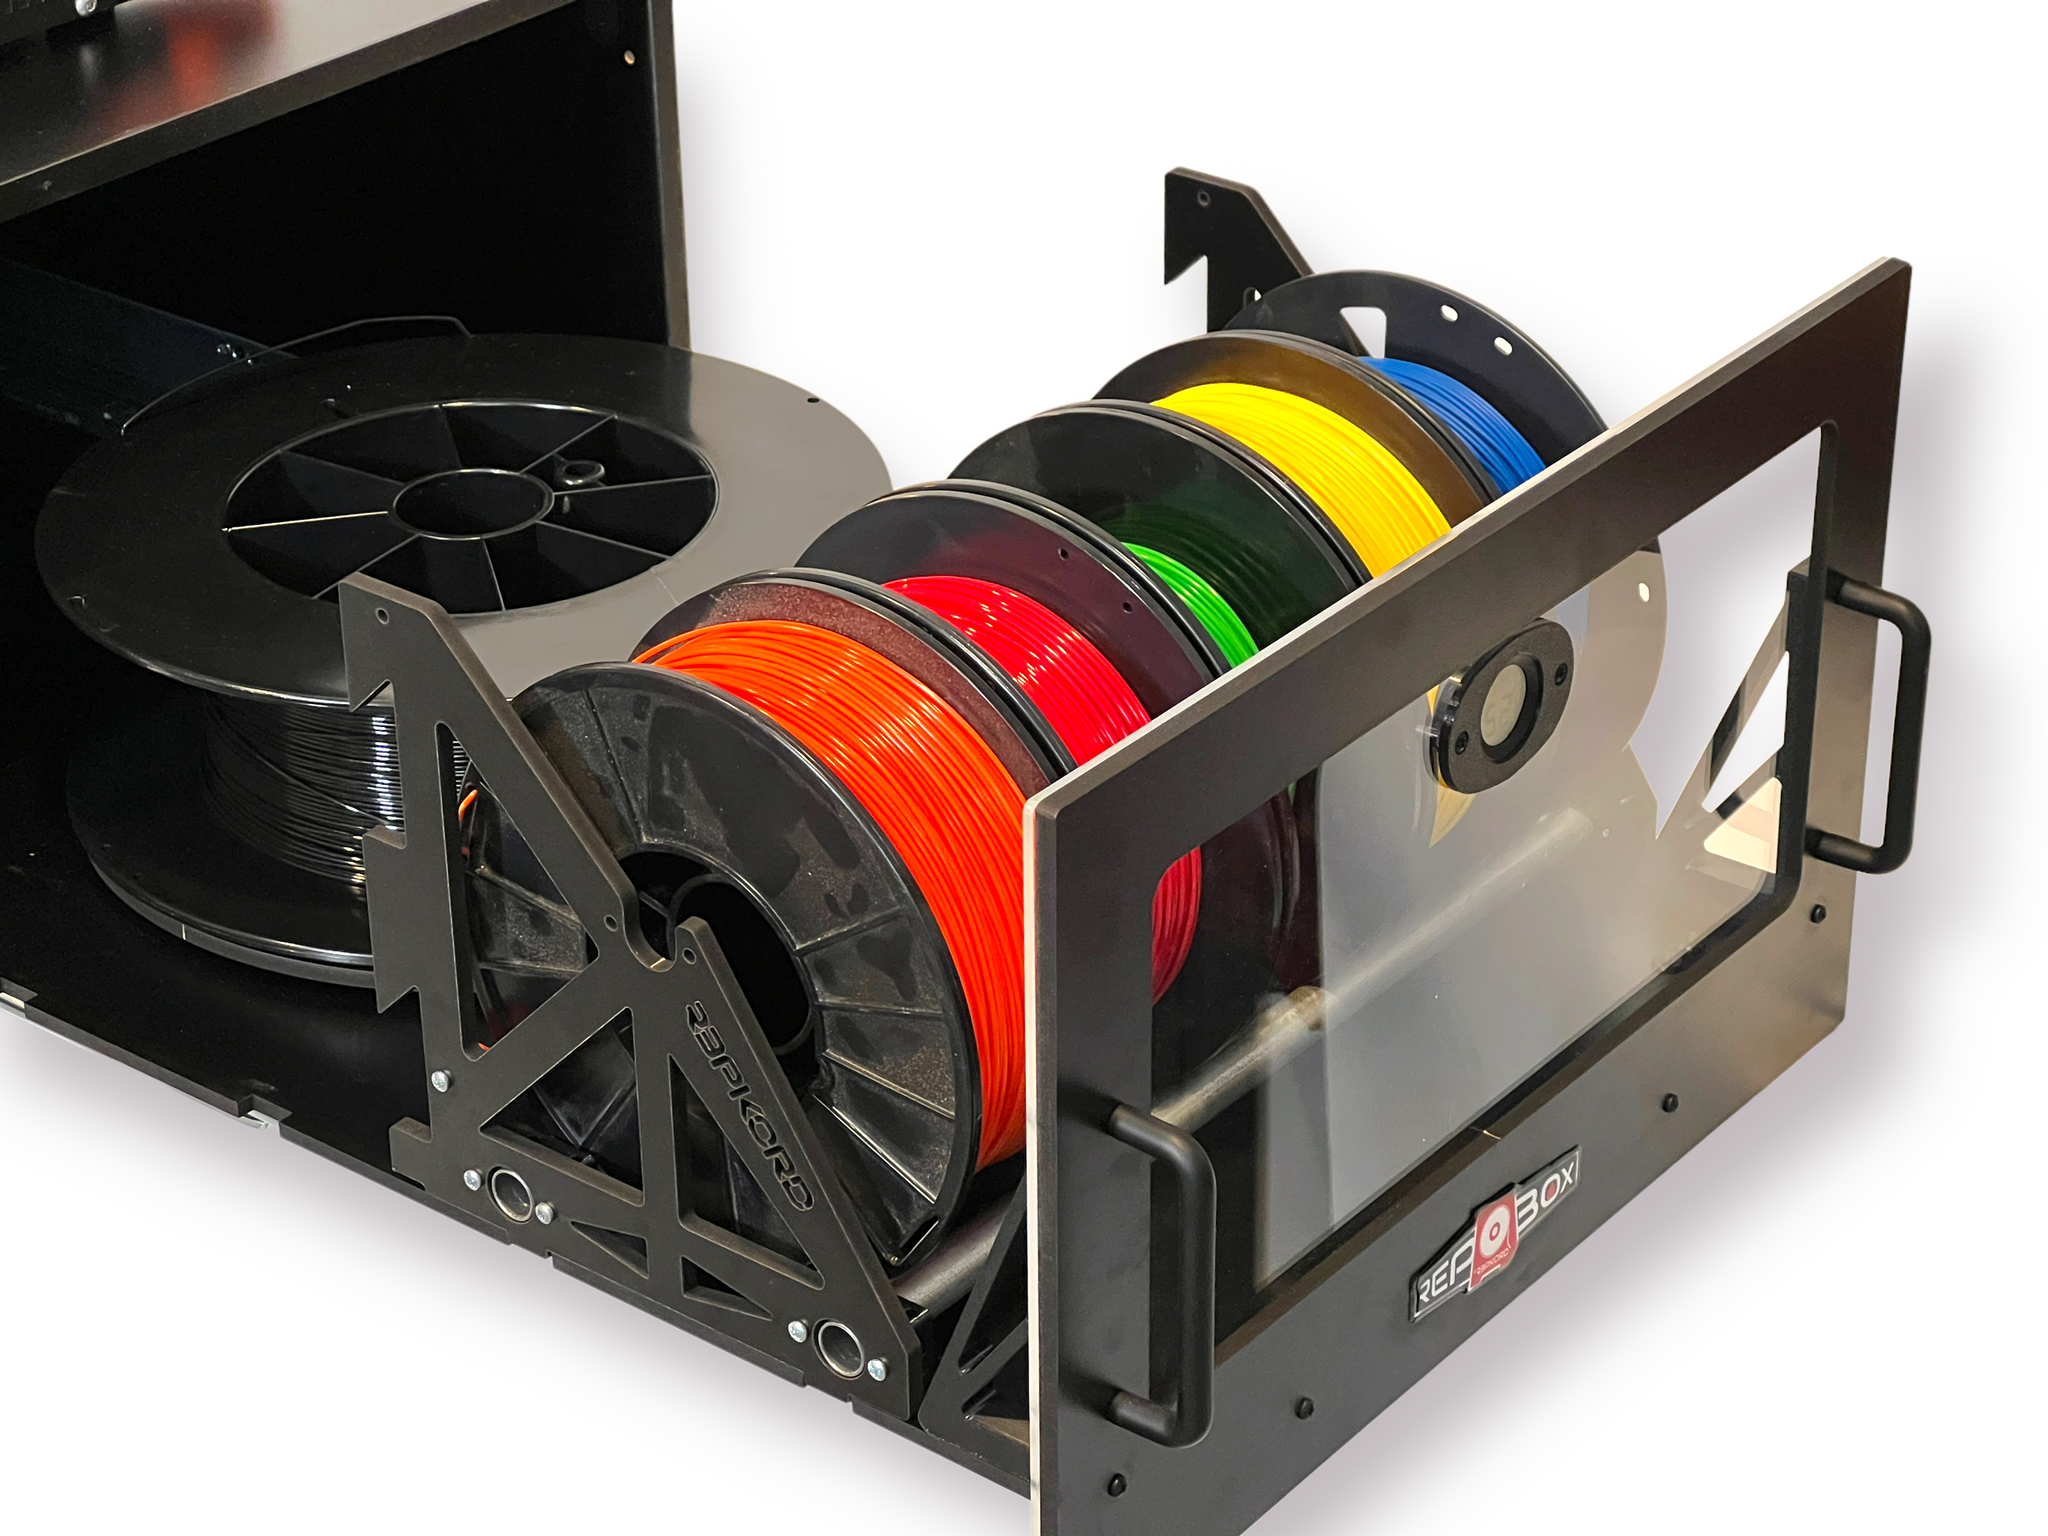 Digital Spool Holder that Weighs your Filament 